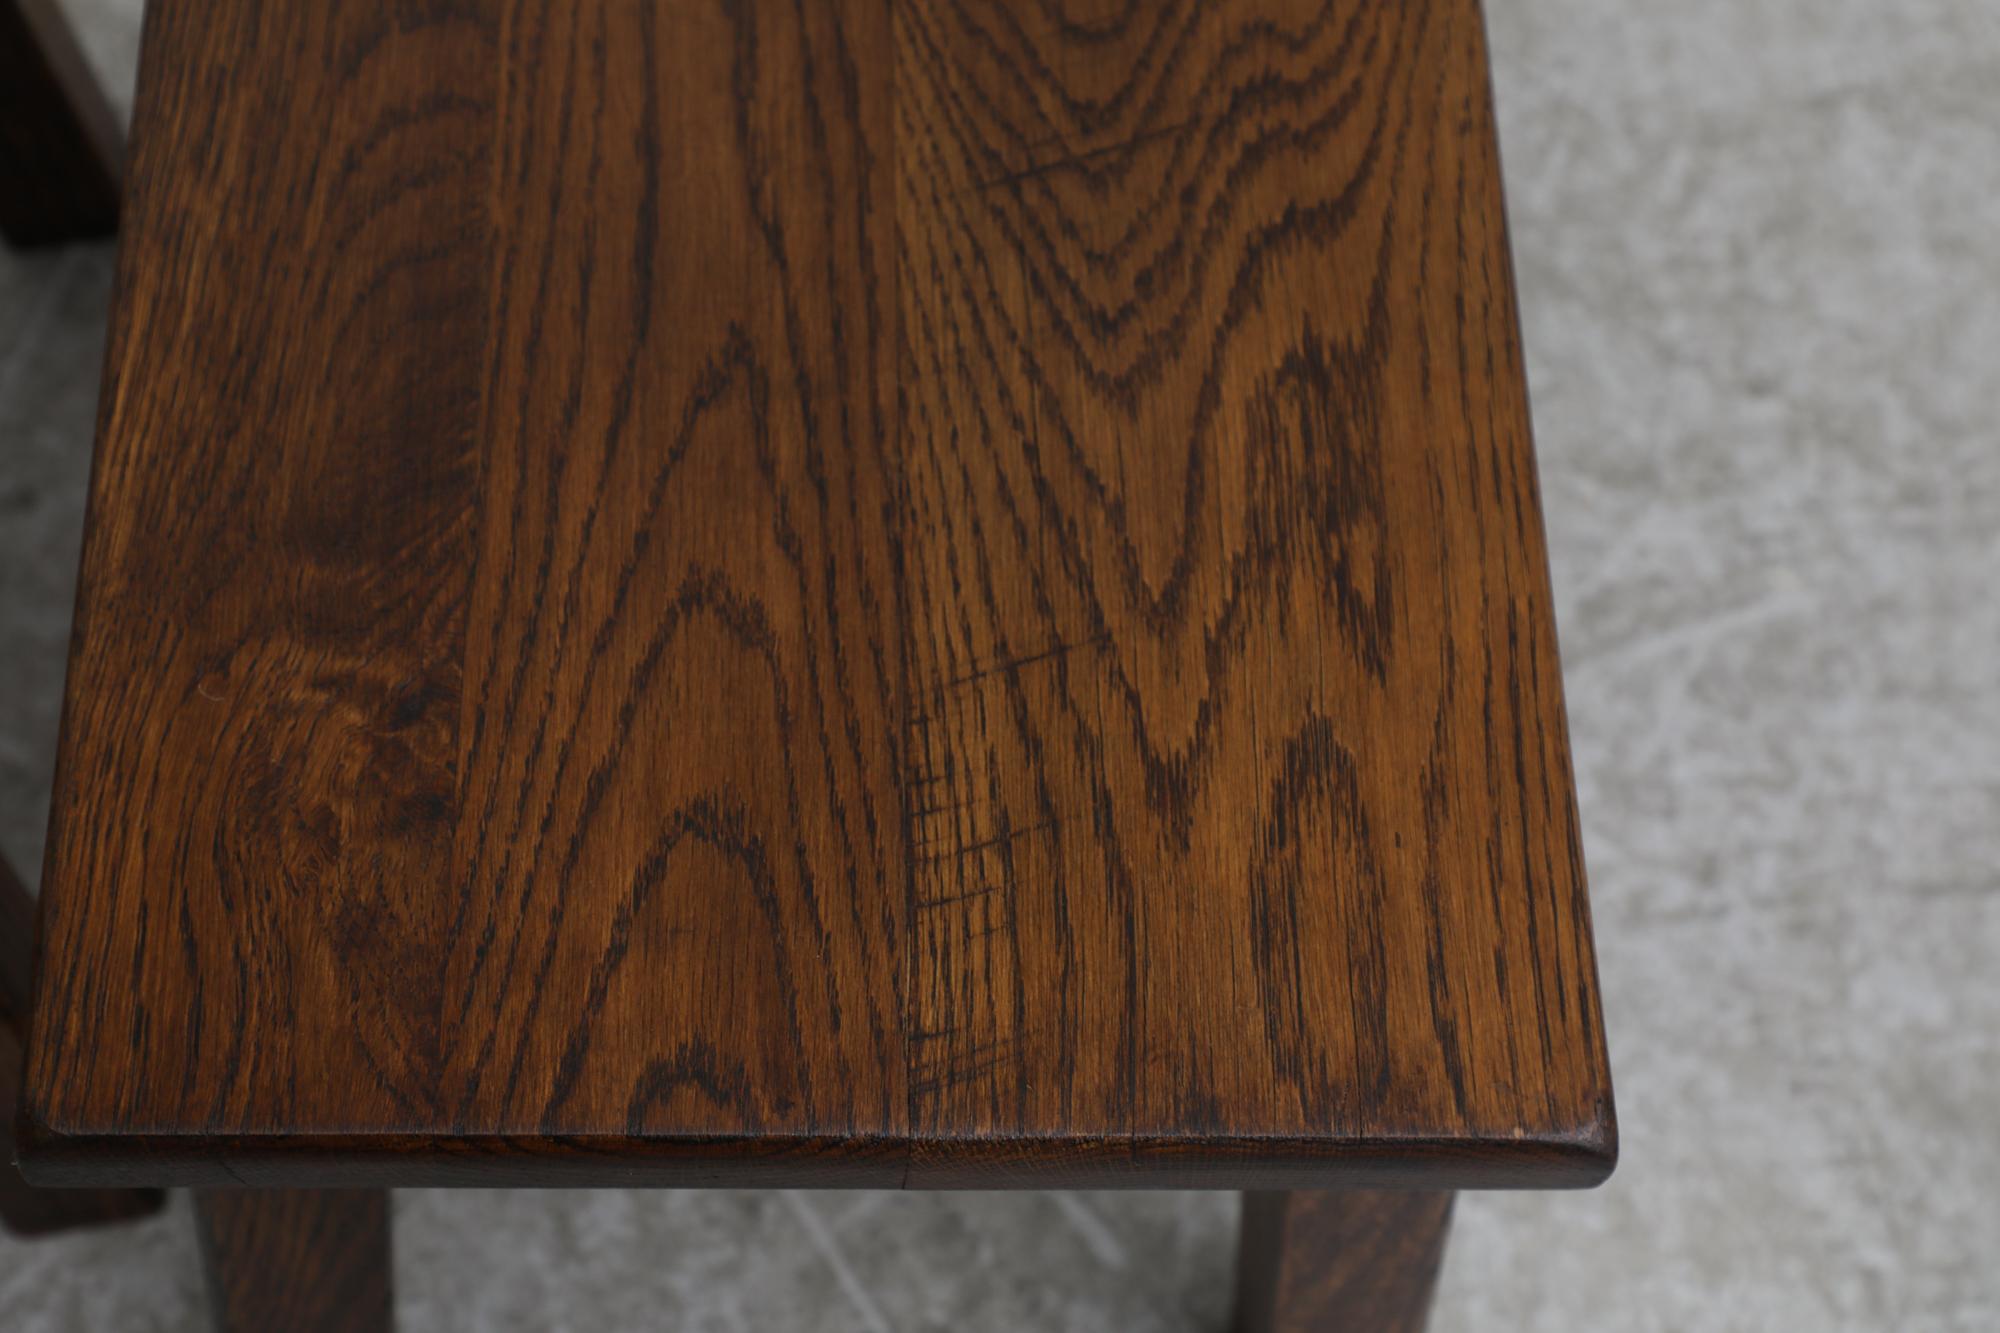 Pierre Chapo Inspired Dark Oak Brutalist Nesting Tables w/ Thick Angled Legs For Sale 9